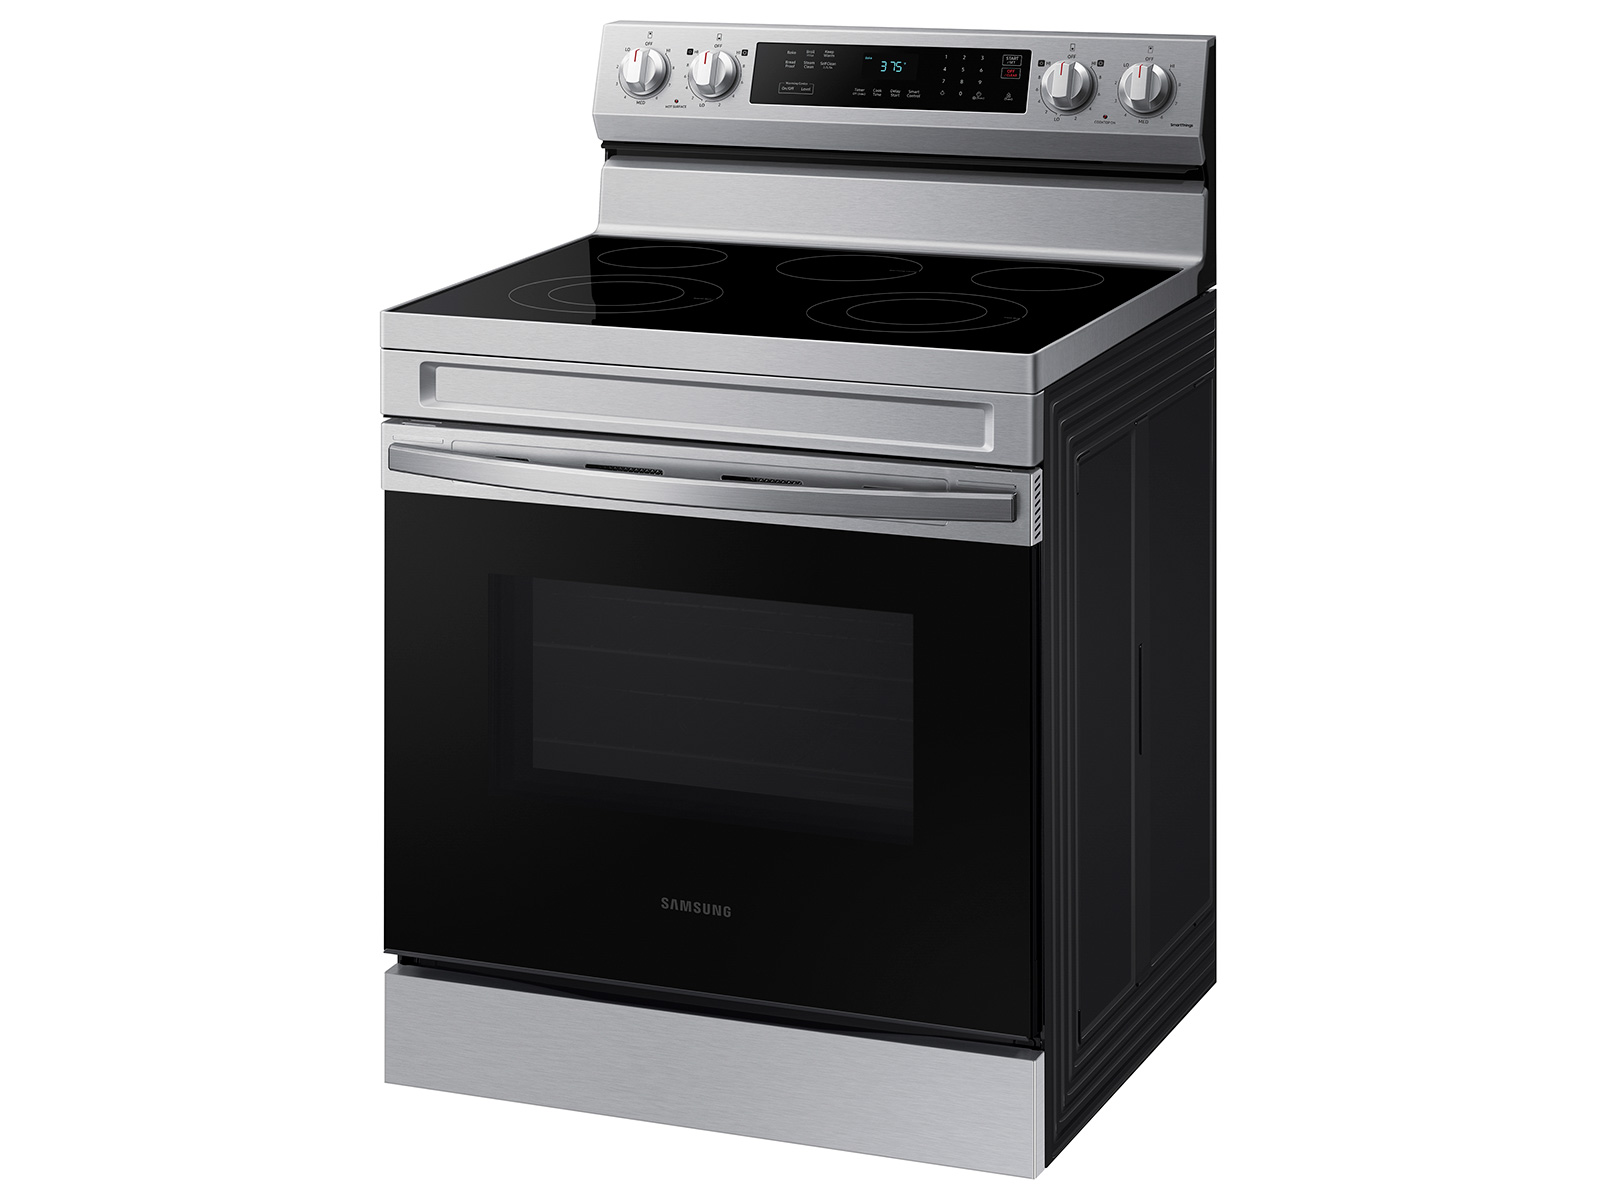 PRO Series Flat Top Original - For 30 Gas or Electric Coil Range Stoves